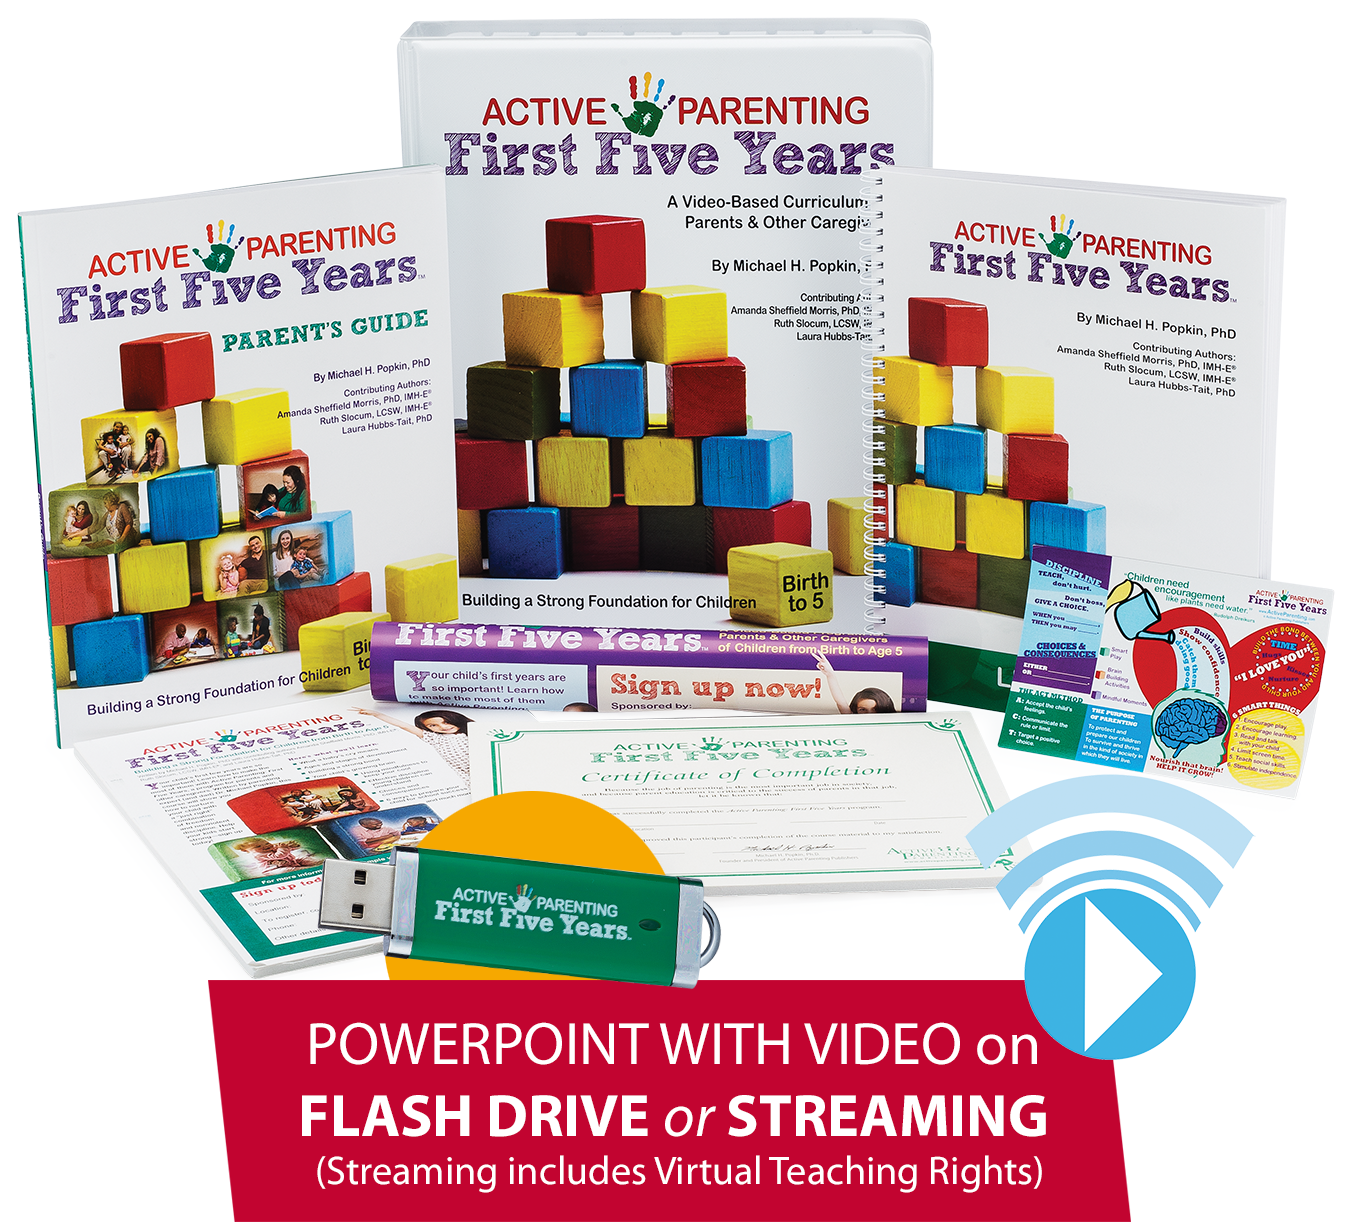 Active Parenting: First Five Years Program on Flash Drive or Streaming